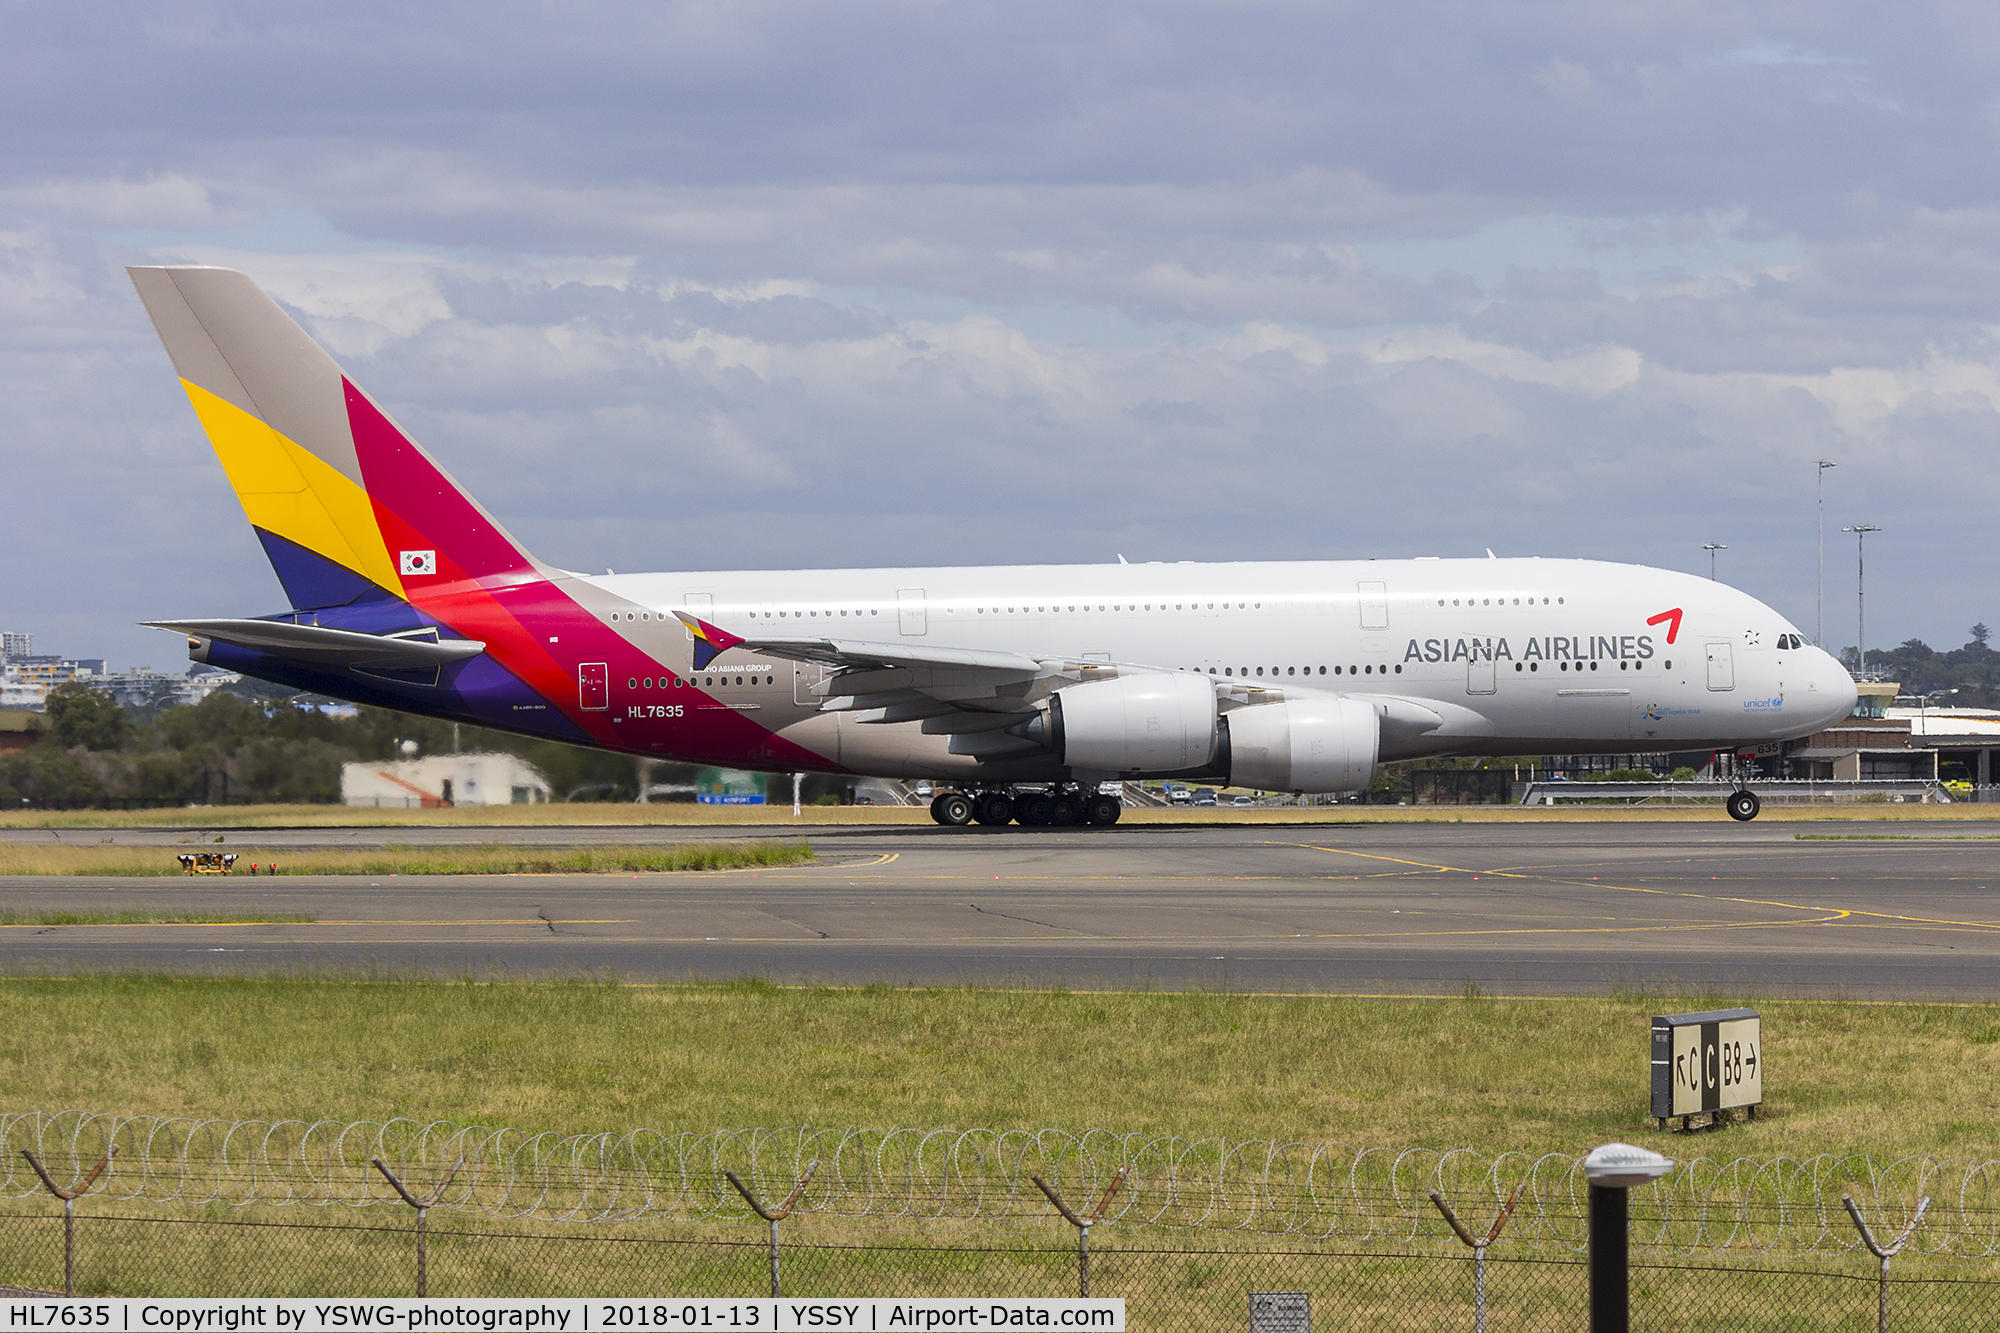 HL7635, 2015 Airbus A380-841 C/N 183, Asiana Airlines (HL7635) Airbus A380-841 departing Sydney Airport